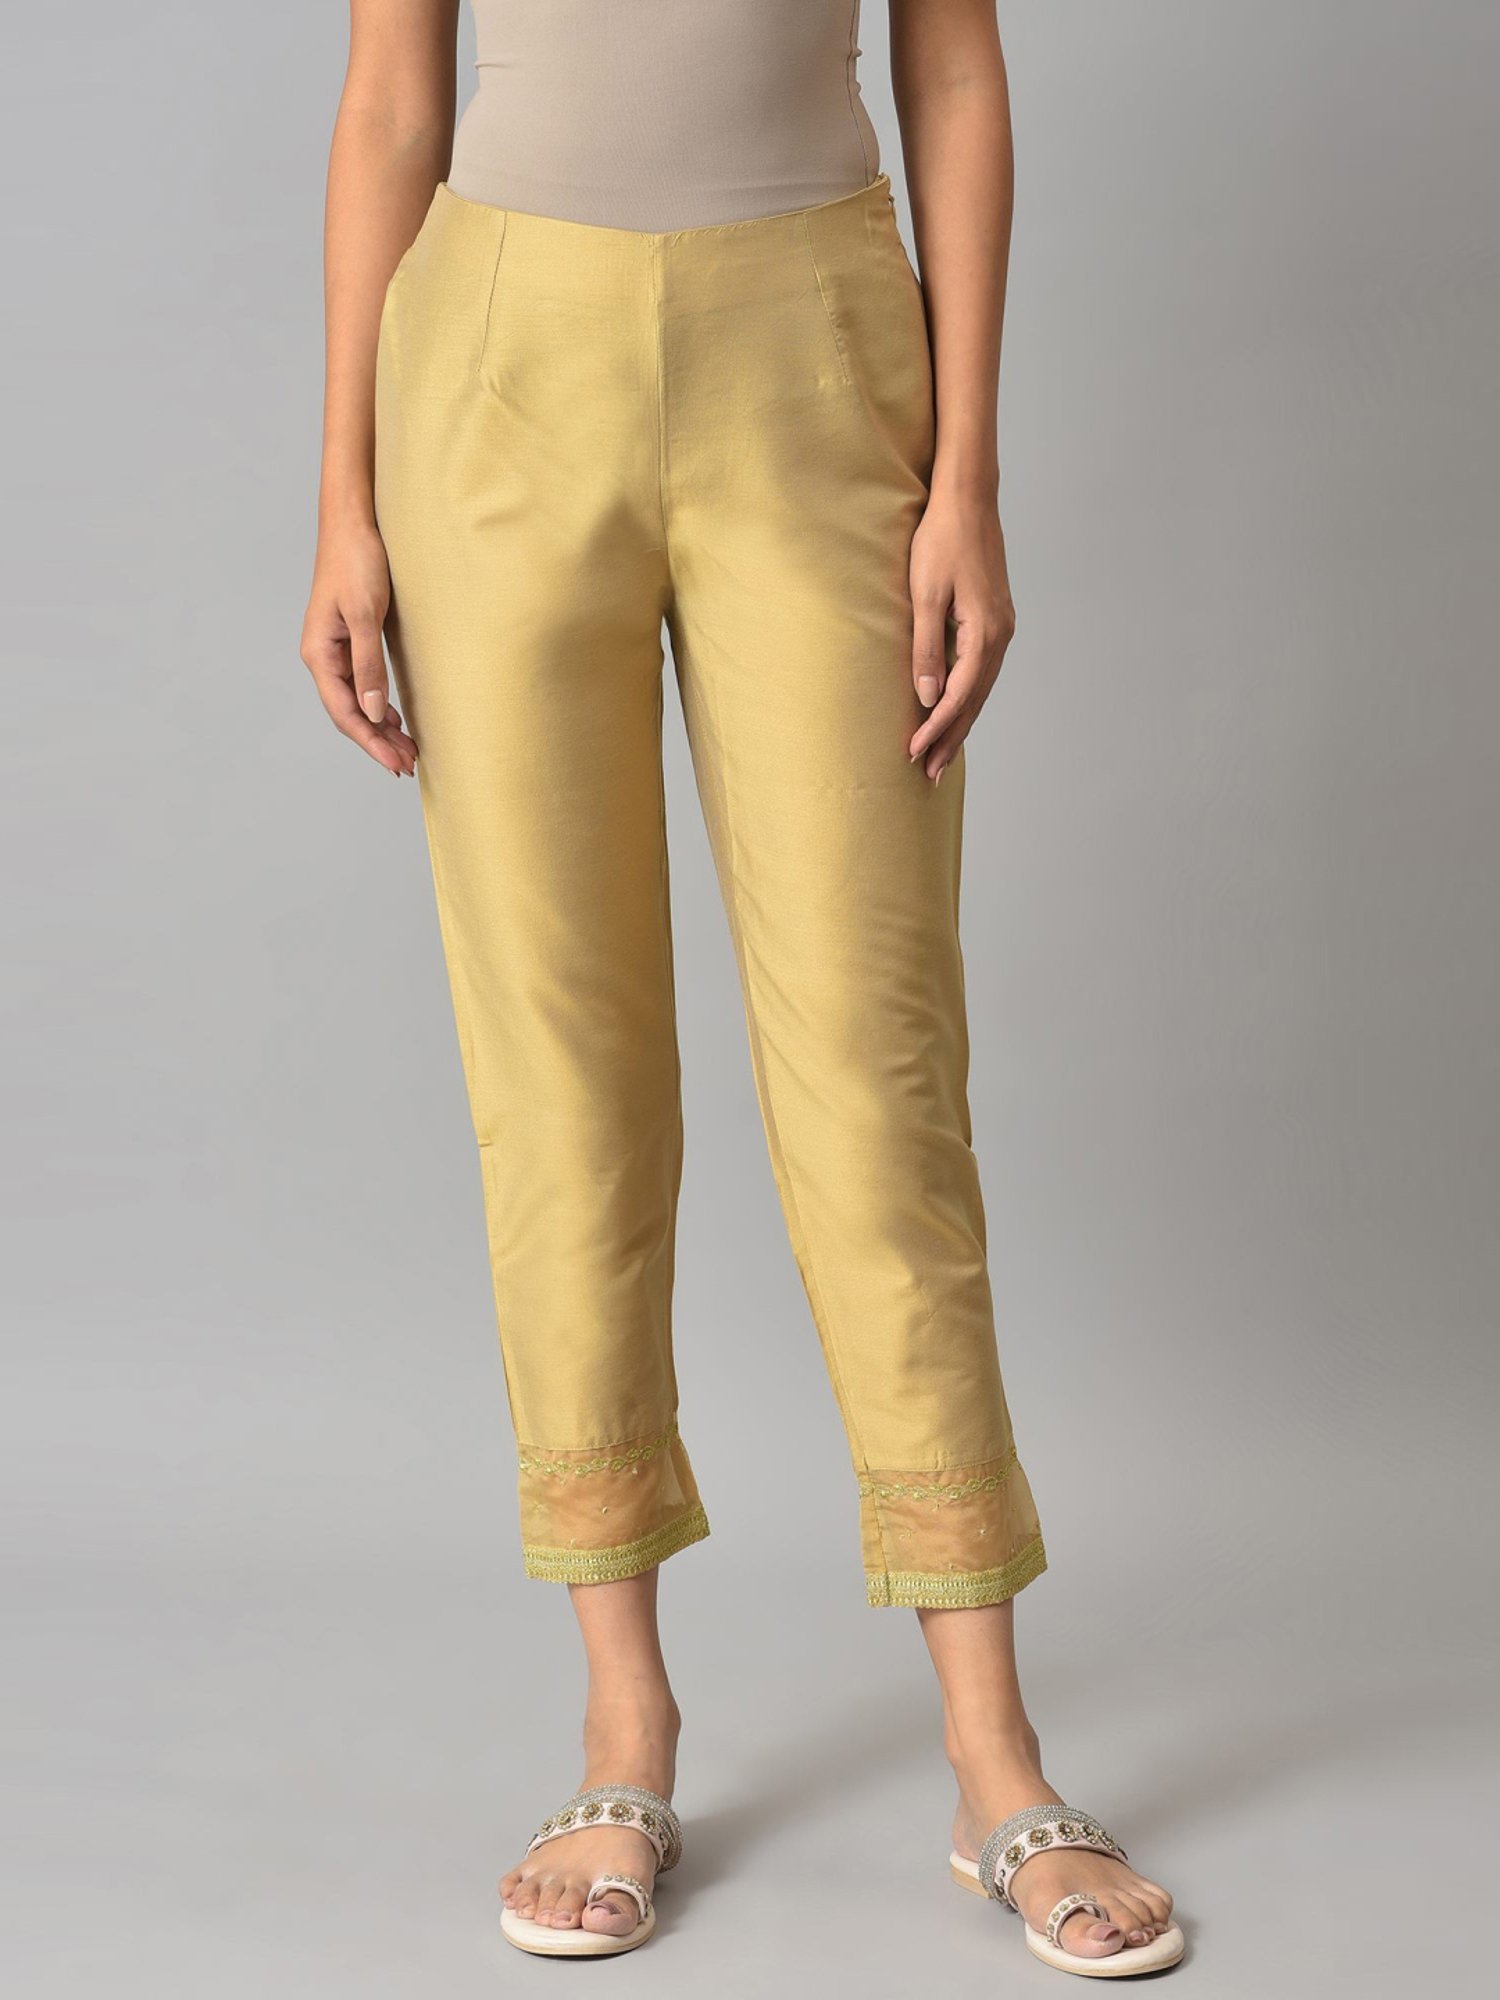 Juniper Indianwear : Buy Juniper White Grey Cotton Solid Cigarette Pant  Online | Nykaa Fashion